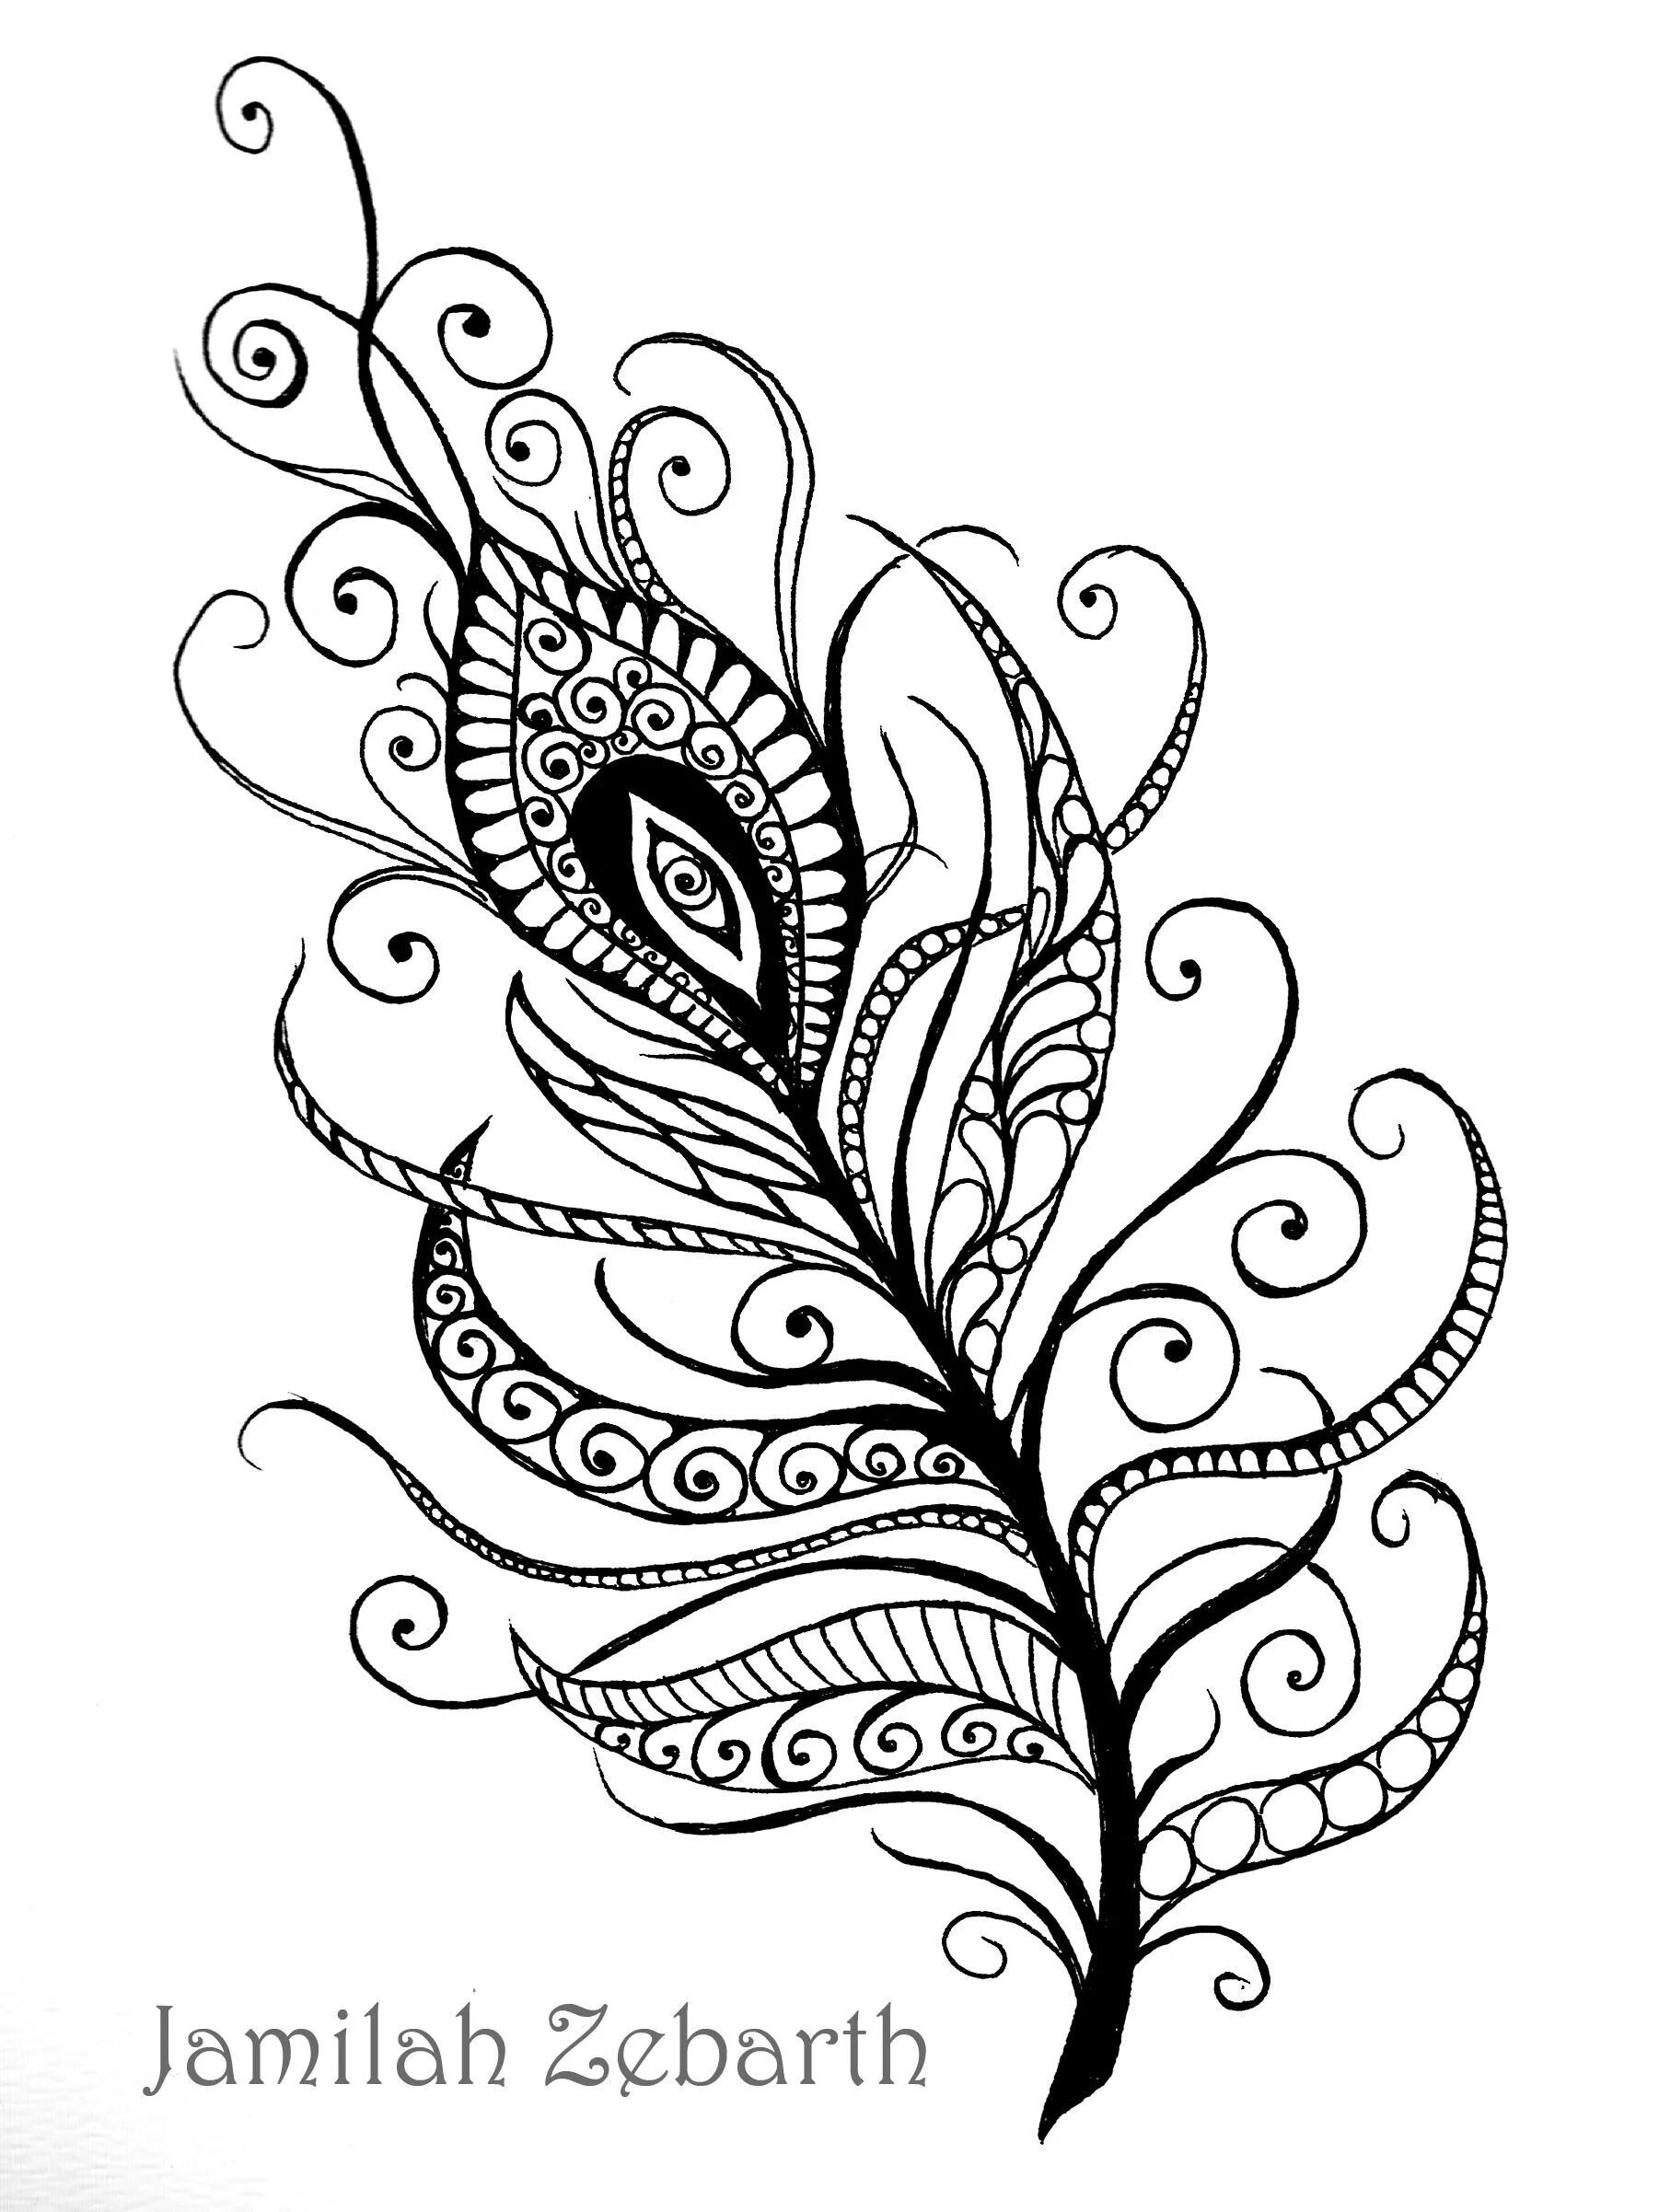 Fun feather bird coloring book for kids